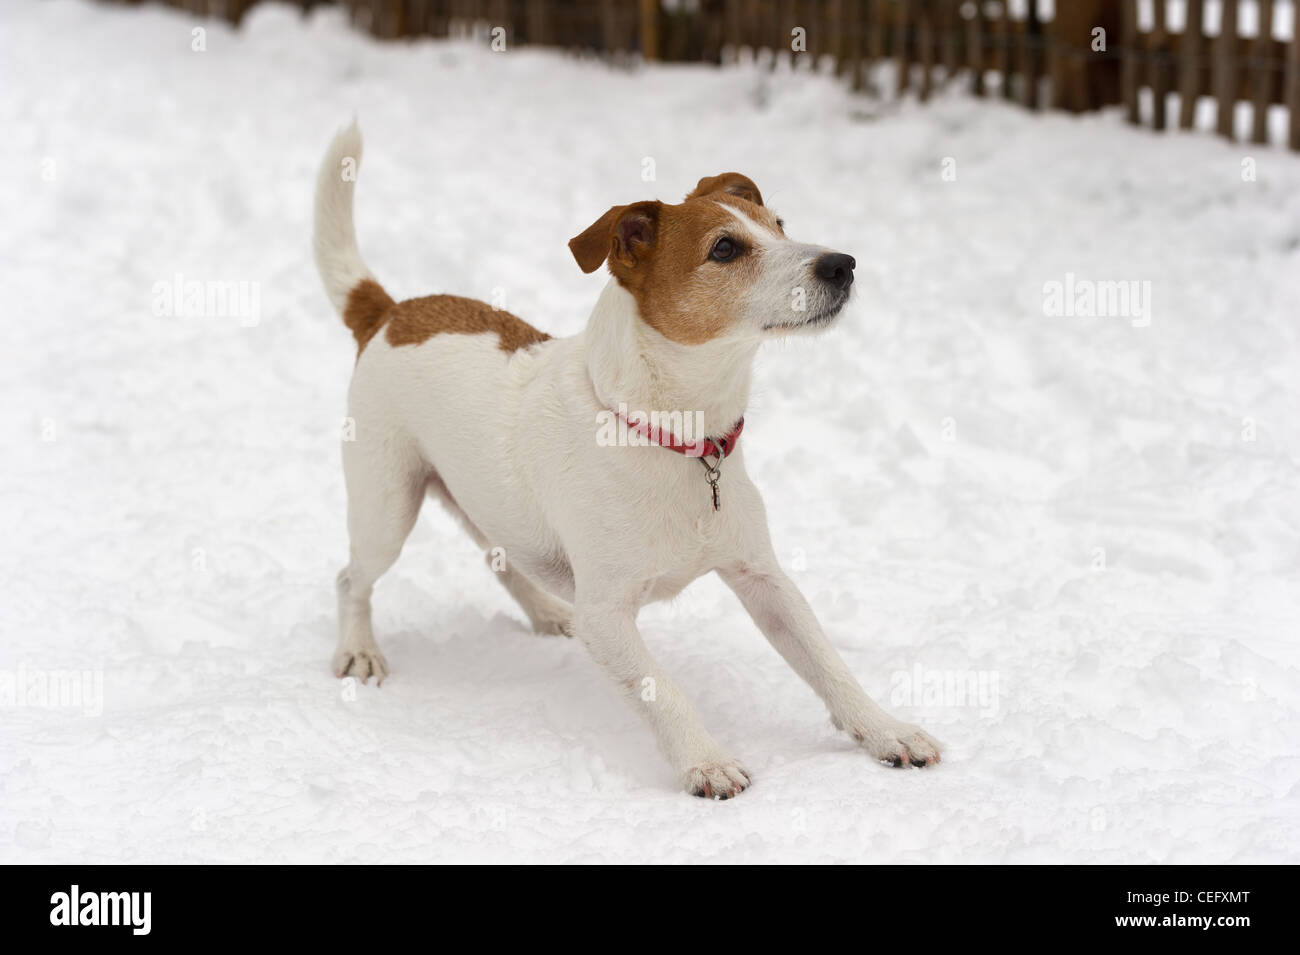 Playful Parson Jack Russell Terrier ready for a game in the snow Stock Photo